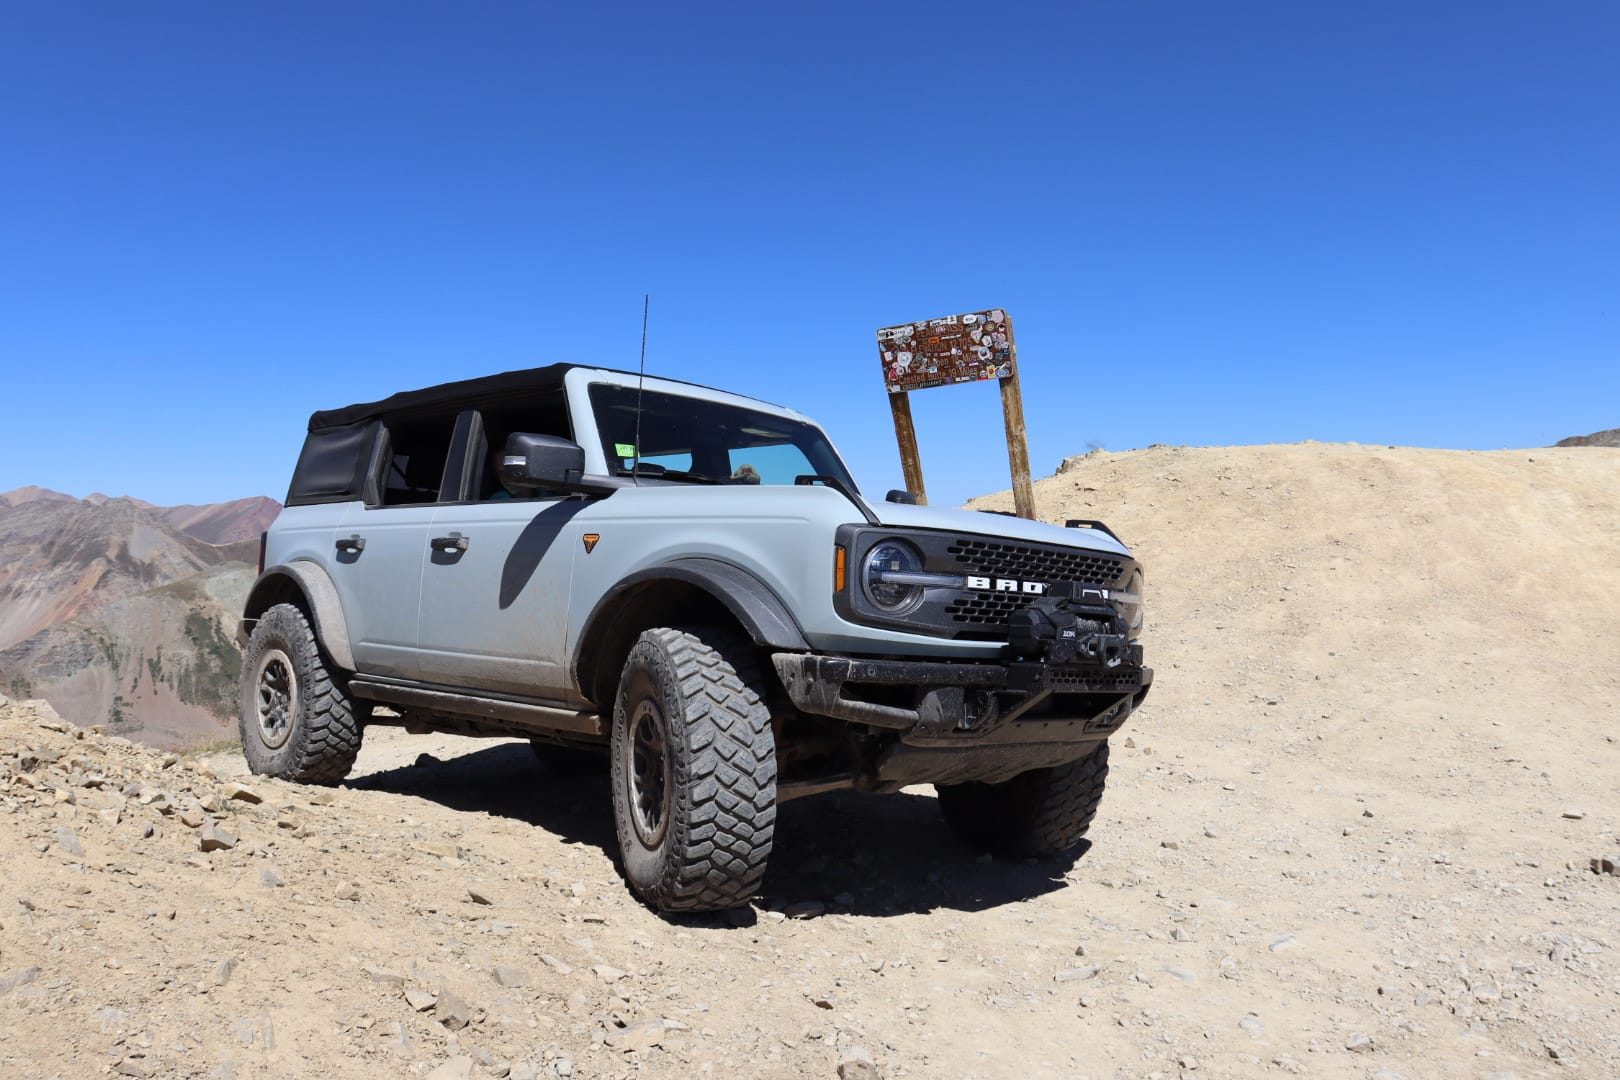 Ford Bronco Let's see your favorite trail photos! 1679696665629